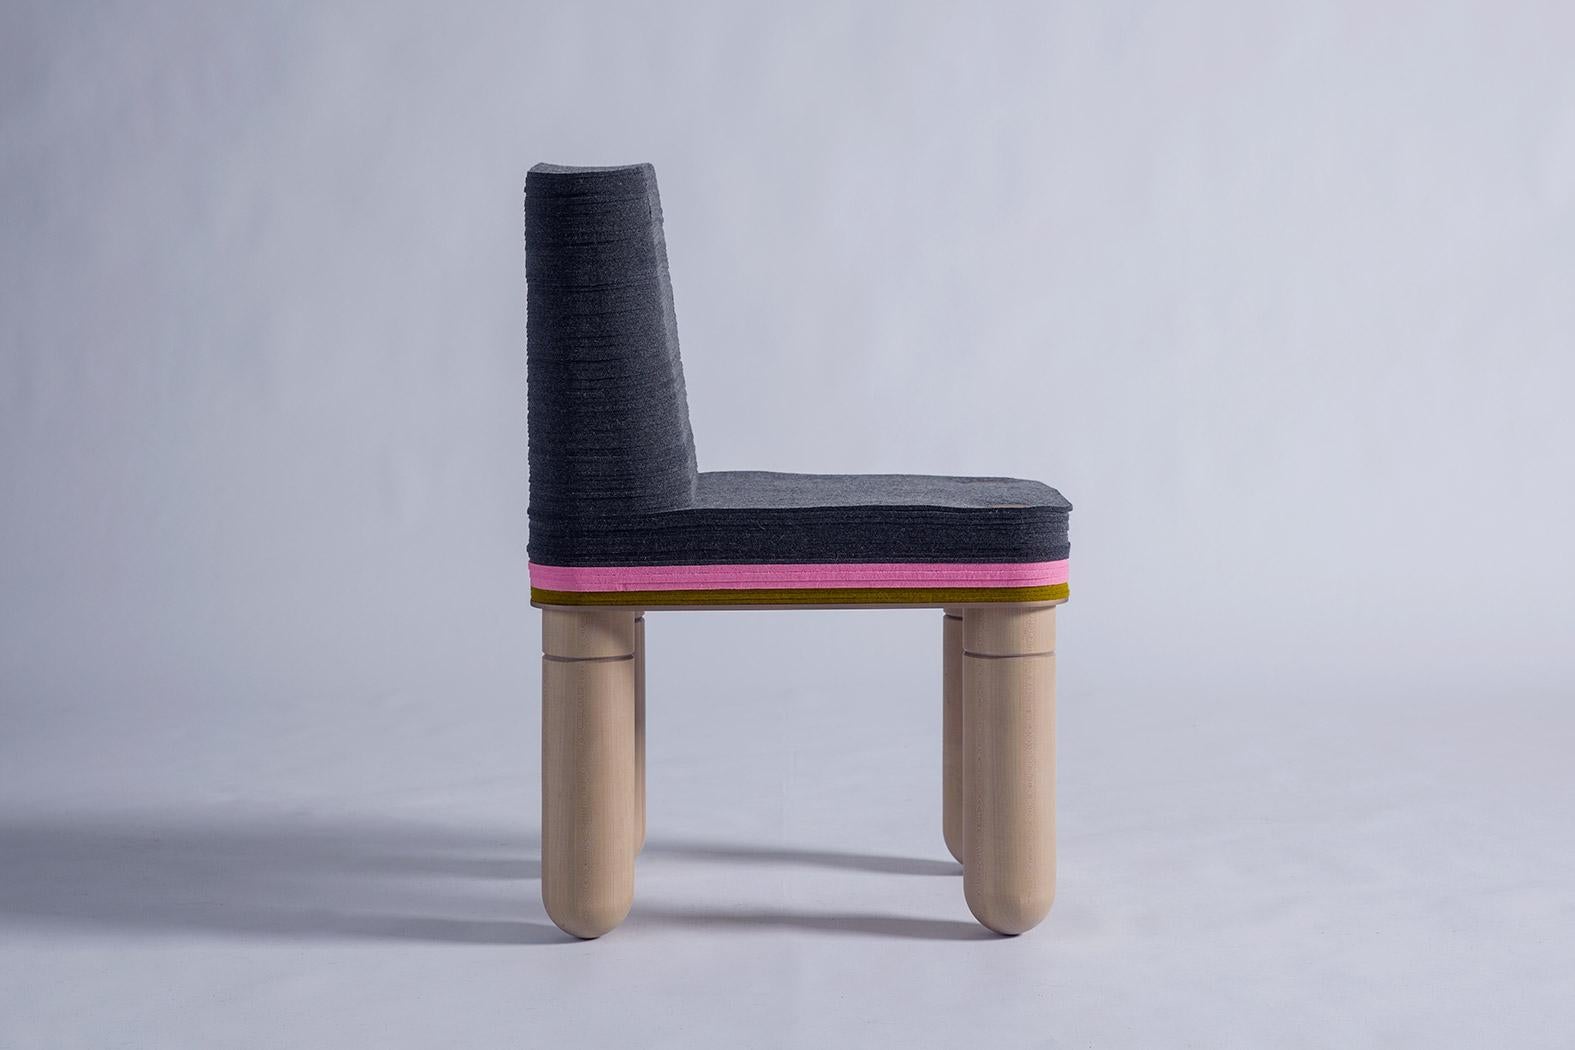 Contemporary Dulces C, Felt and Wood Dine Chair, Laura Kirar in Stackabl, Canada, 2021 For Sale